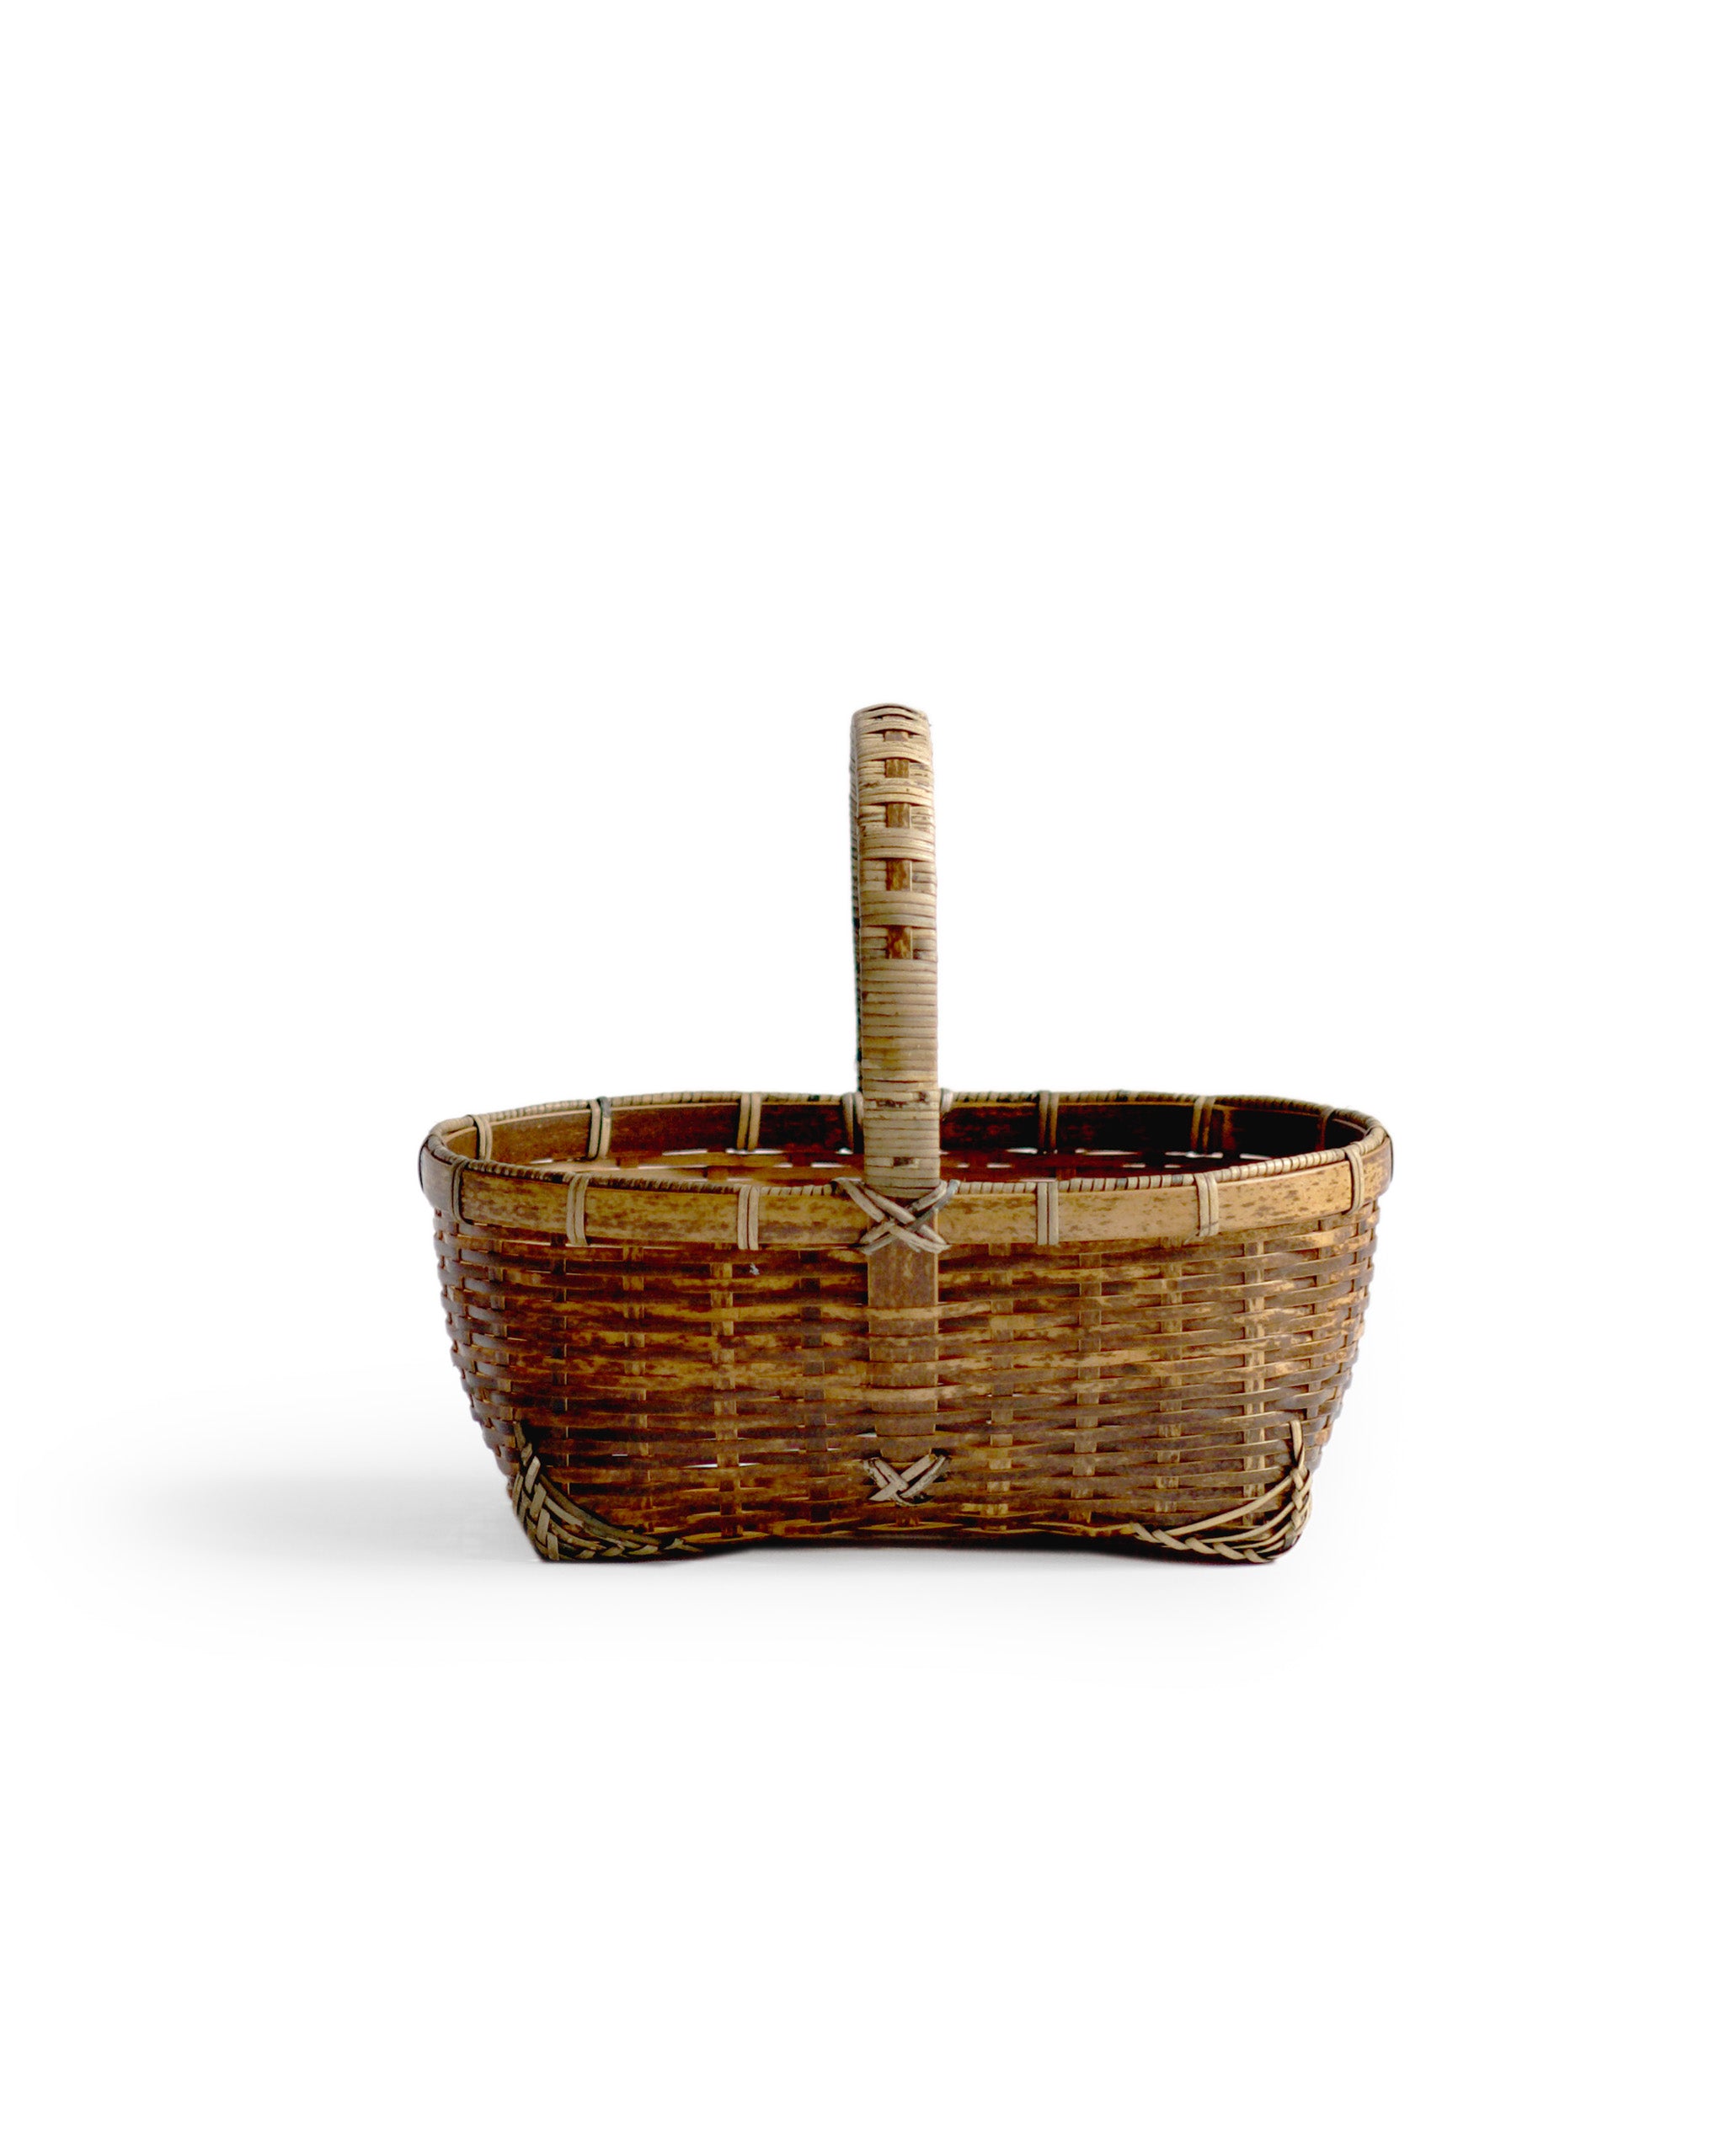 Silhouetted side image of small toradake bread basket with handle by Kohchosai Kosuga against white background.